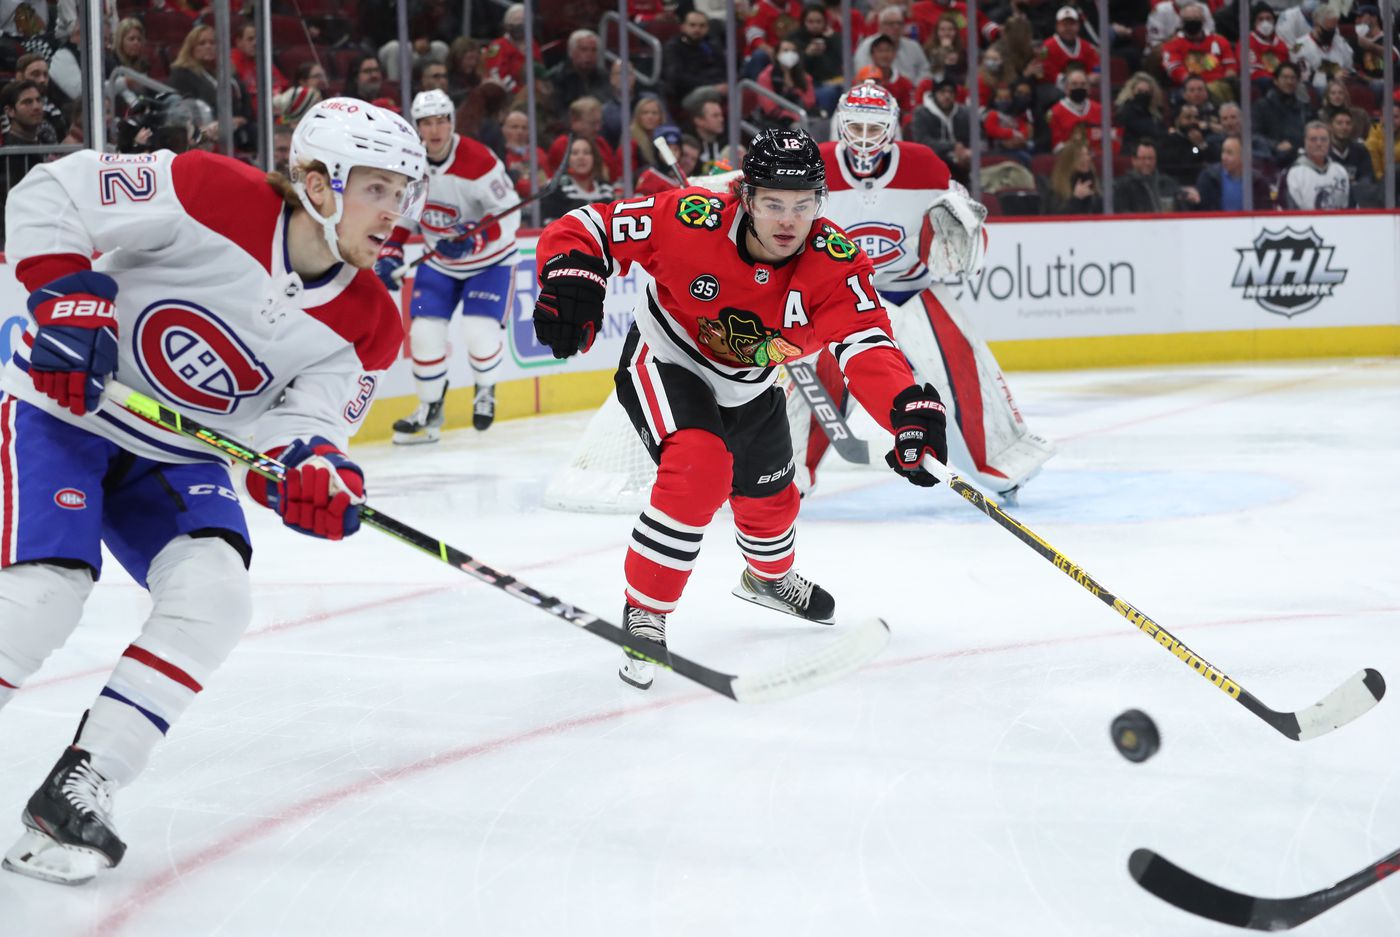 Chicago Blackhawks left wing Alex DeBrincat (12) stretches to reach for the puck in the first period against the Montreal Canadiens at United Center on Jan. 13, 2022, in Chicago.